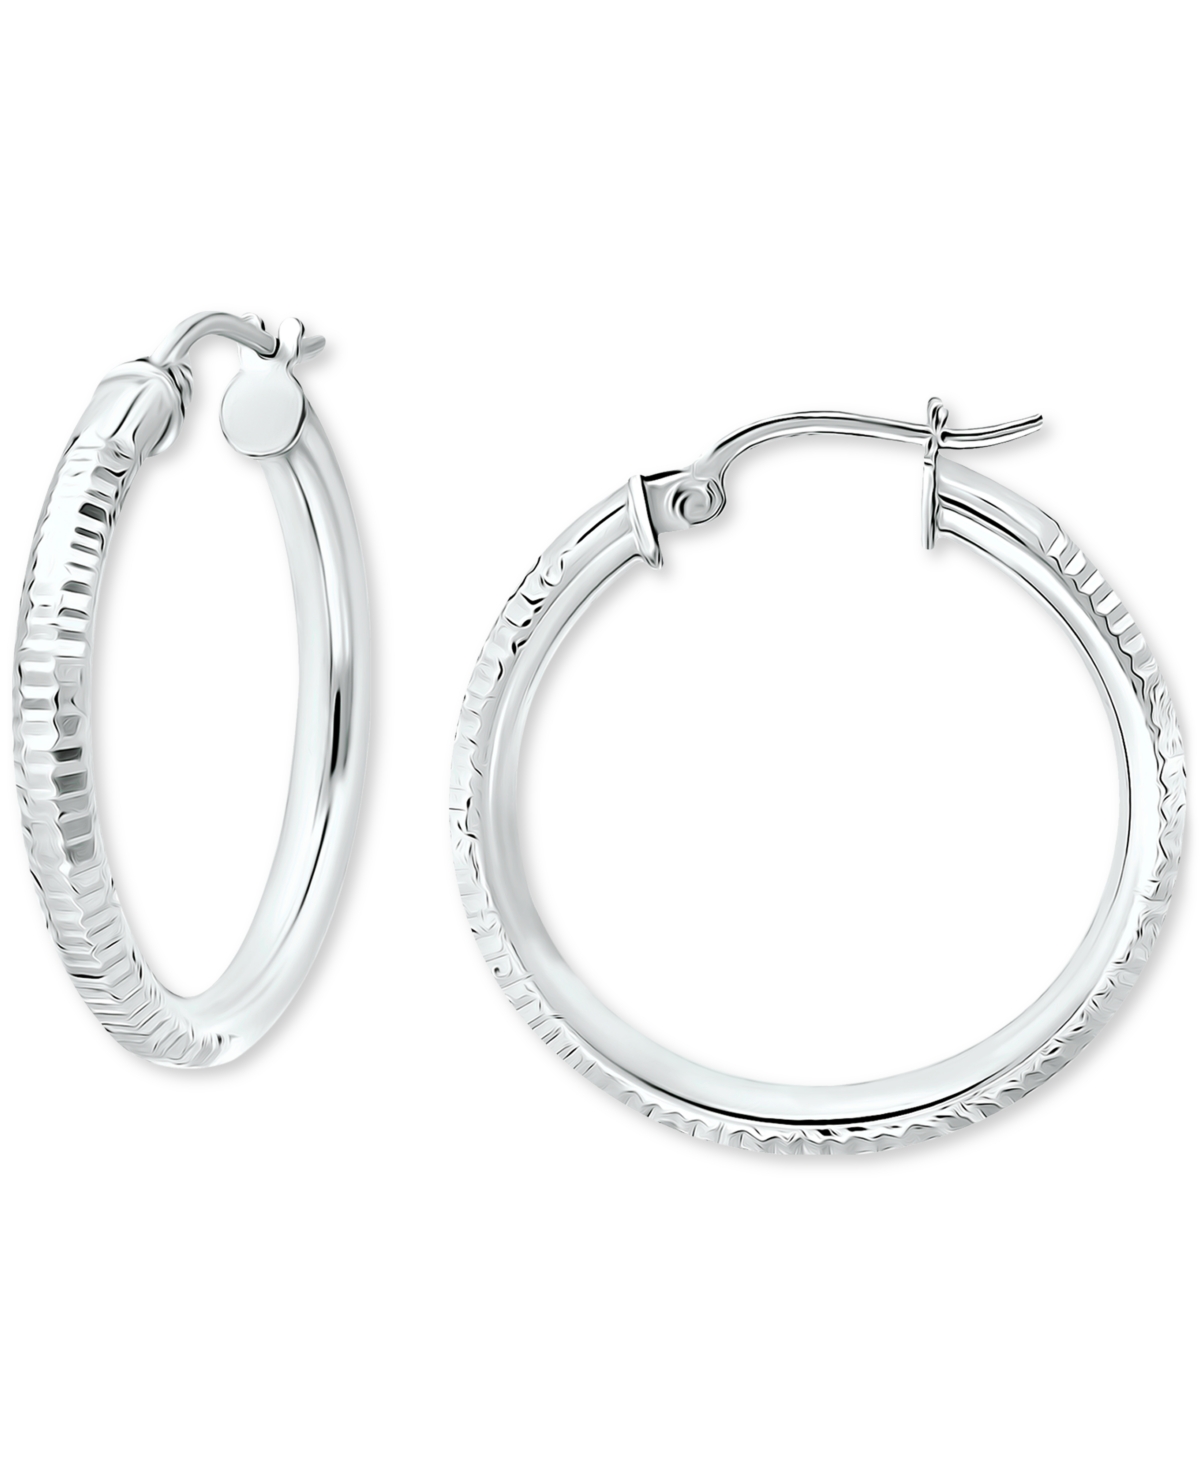 Giani Bernini Ribbed Texture Small Hoop Earrings in Sterling Silver, 1", Created for Macy's